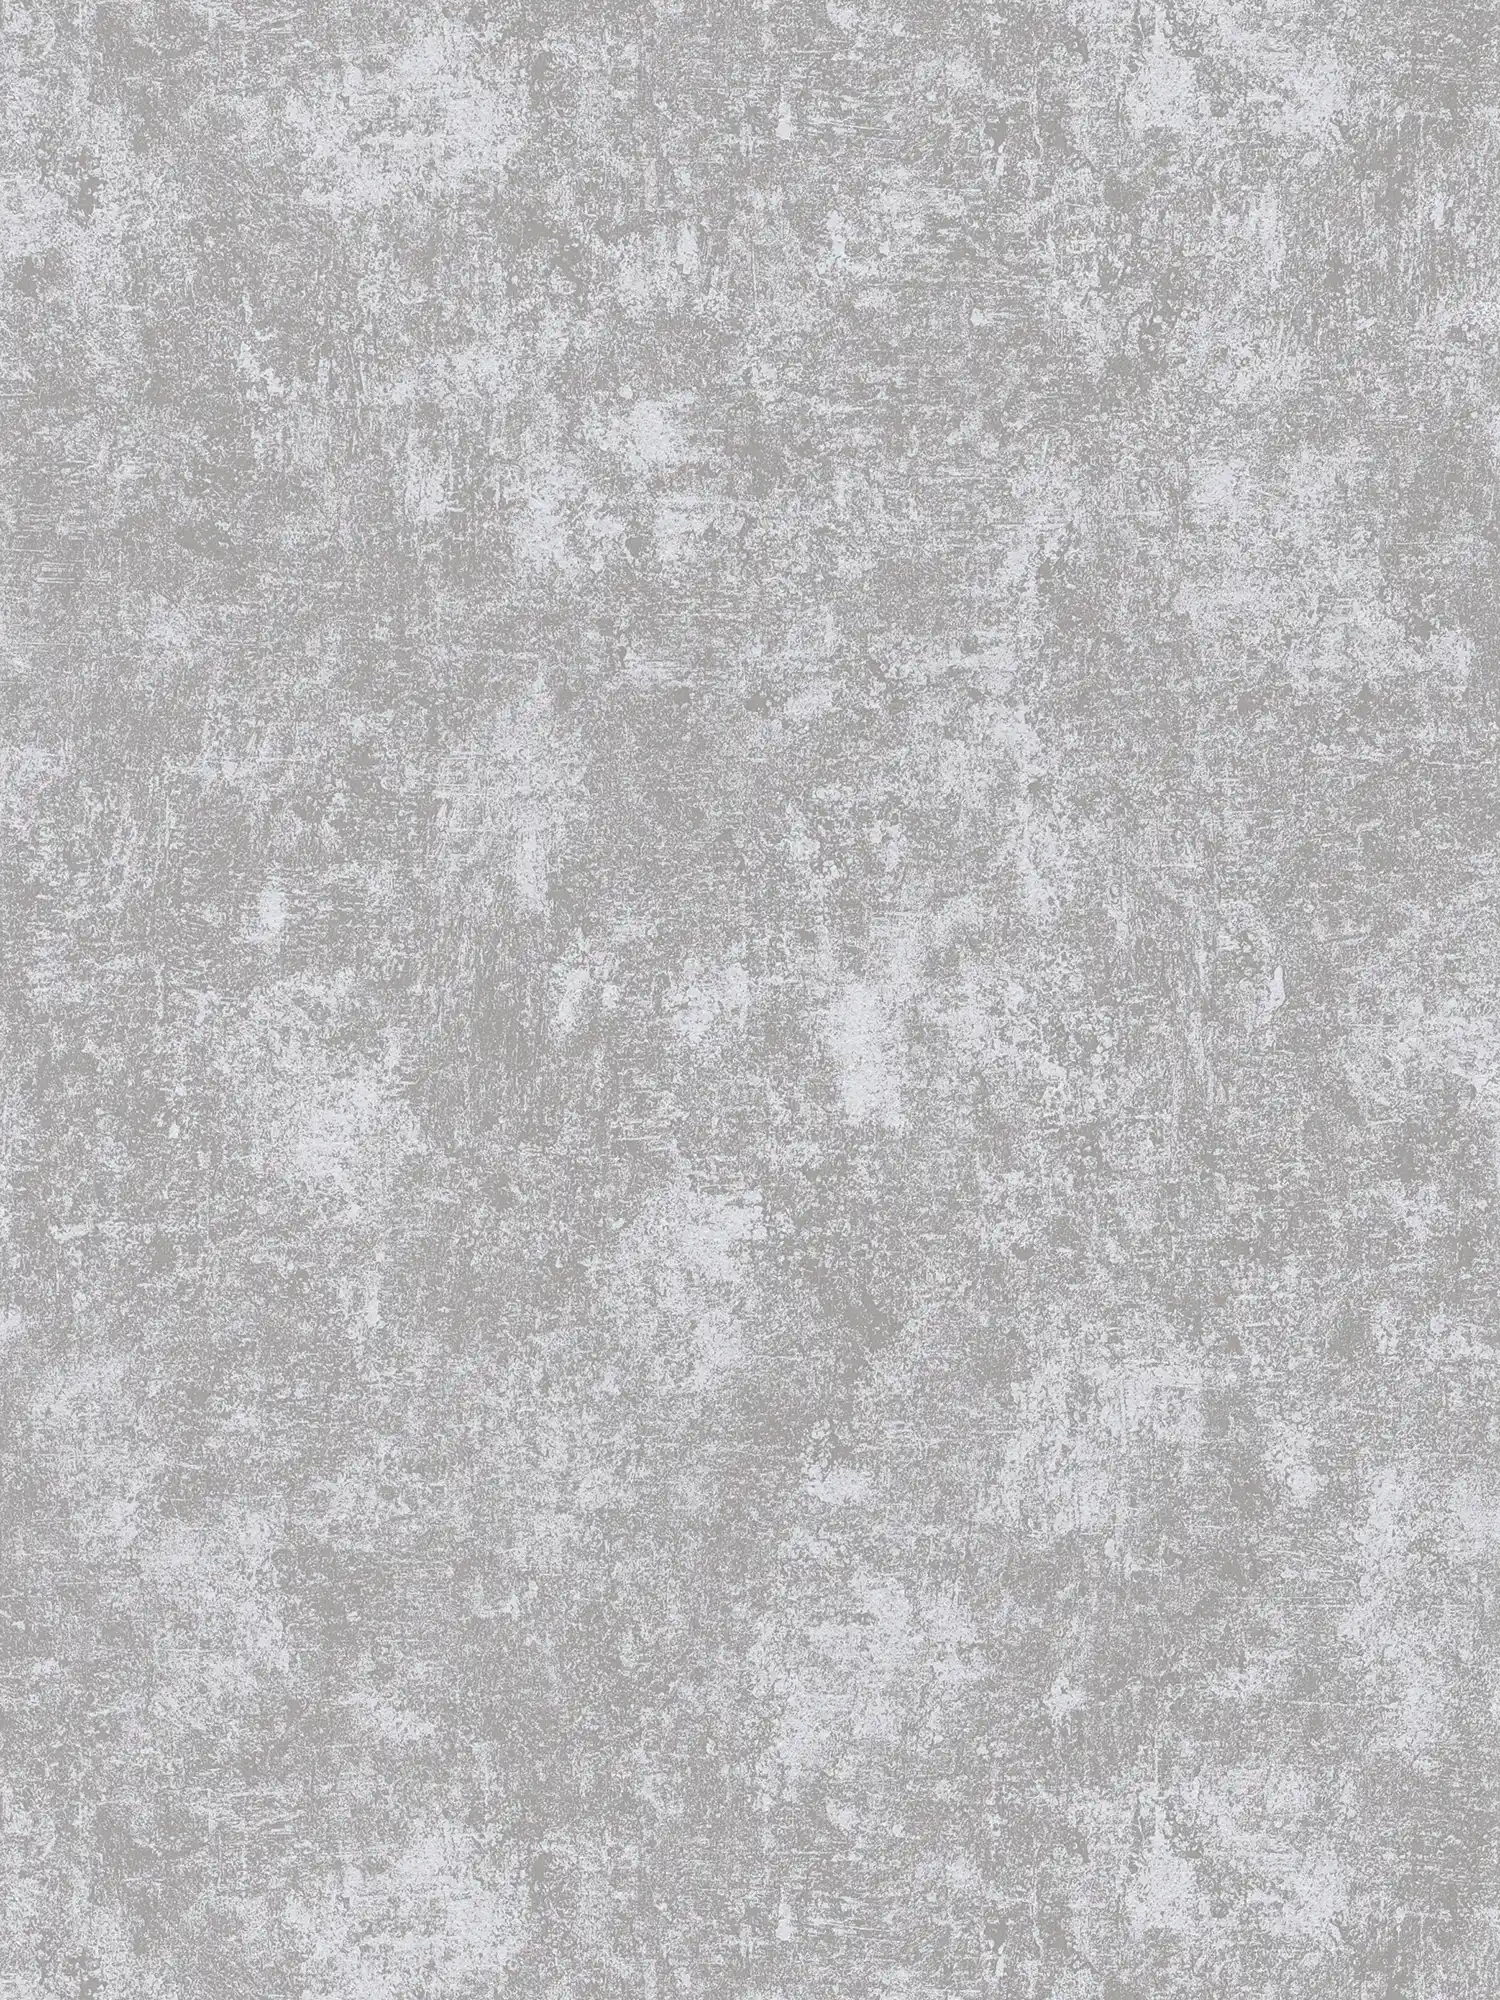 Wallpaper with metallic and gloss effect smooth - silver, grey, metallic
